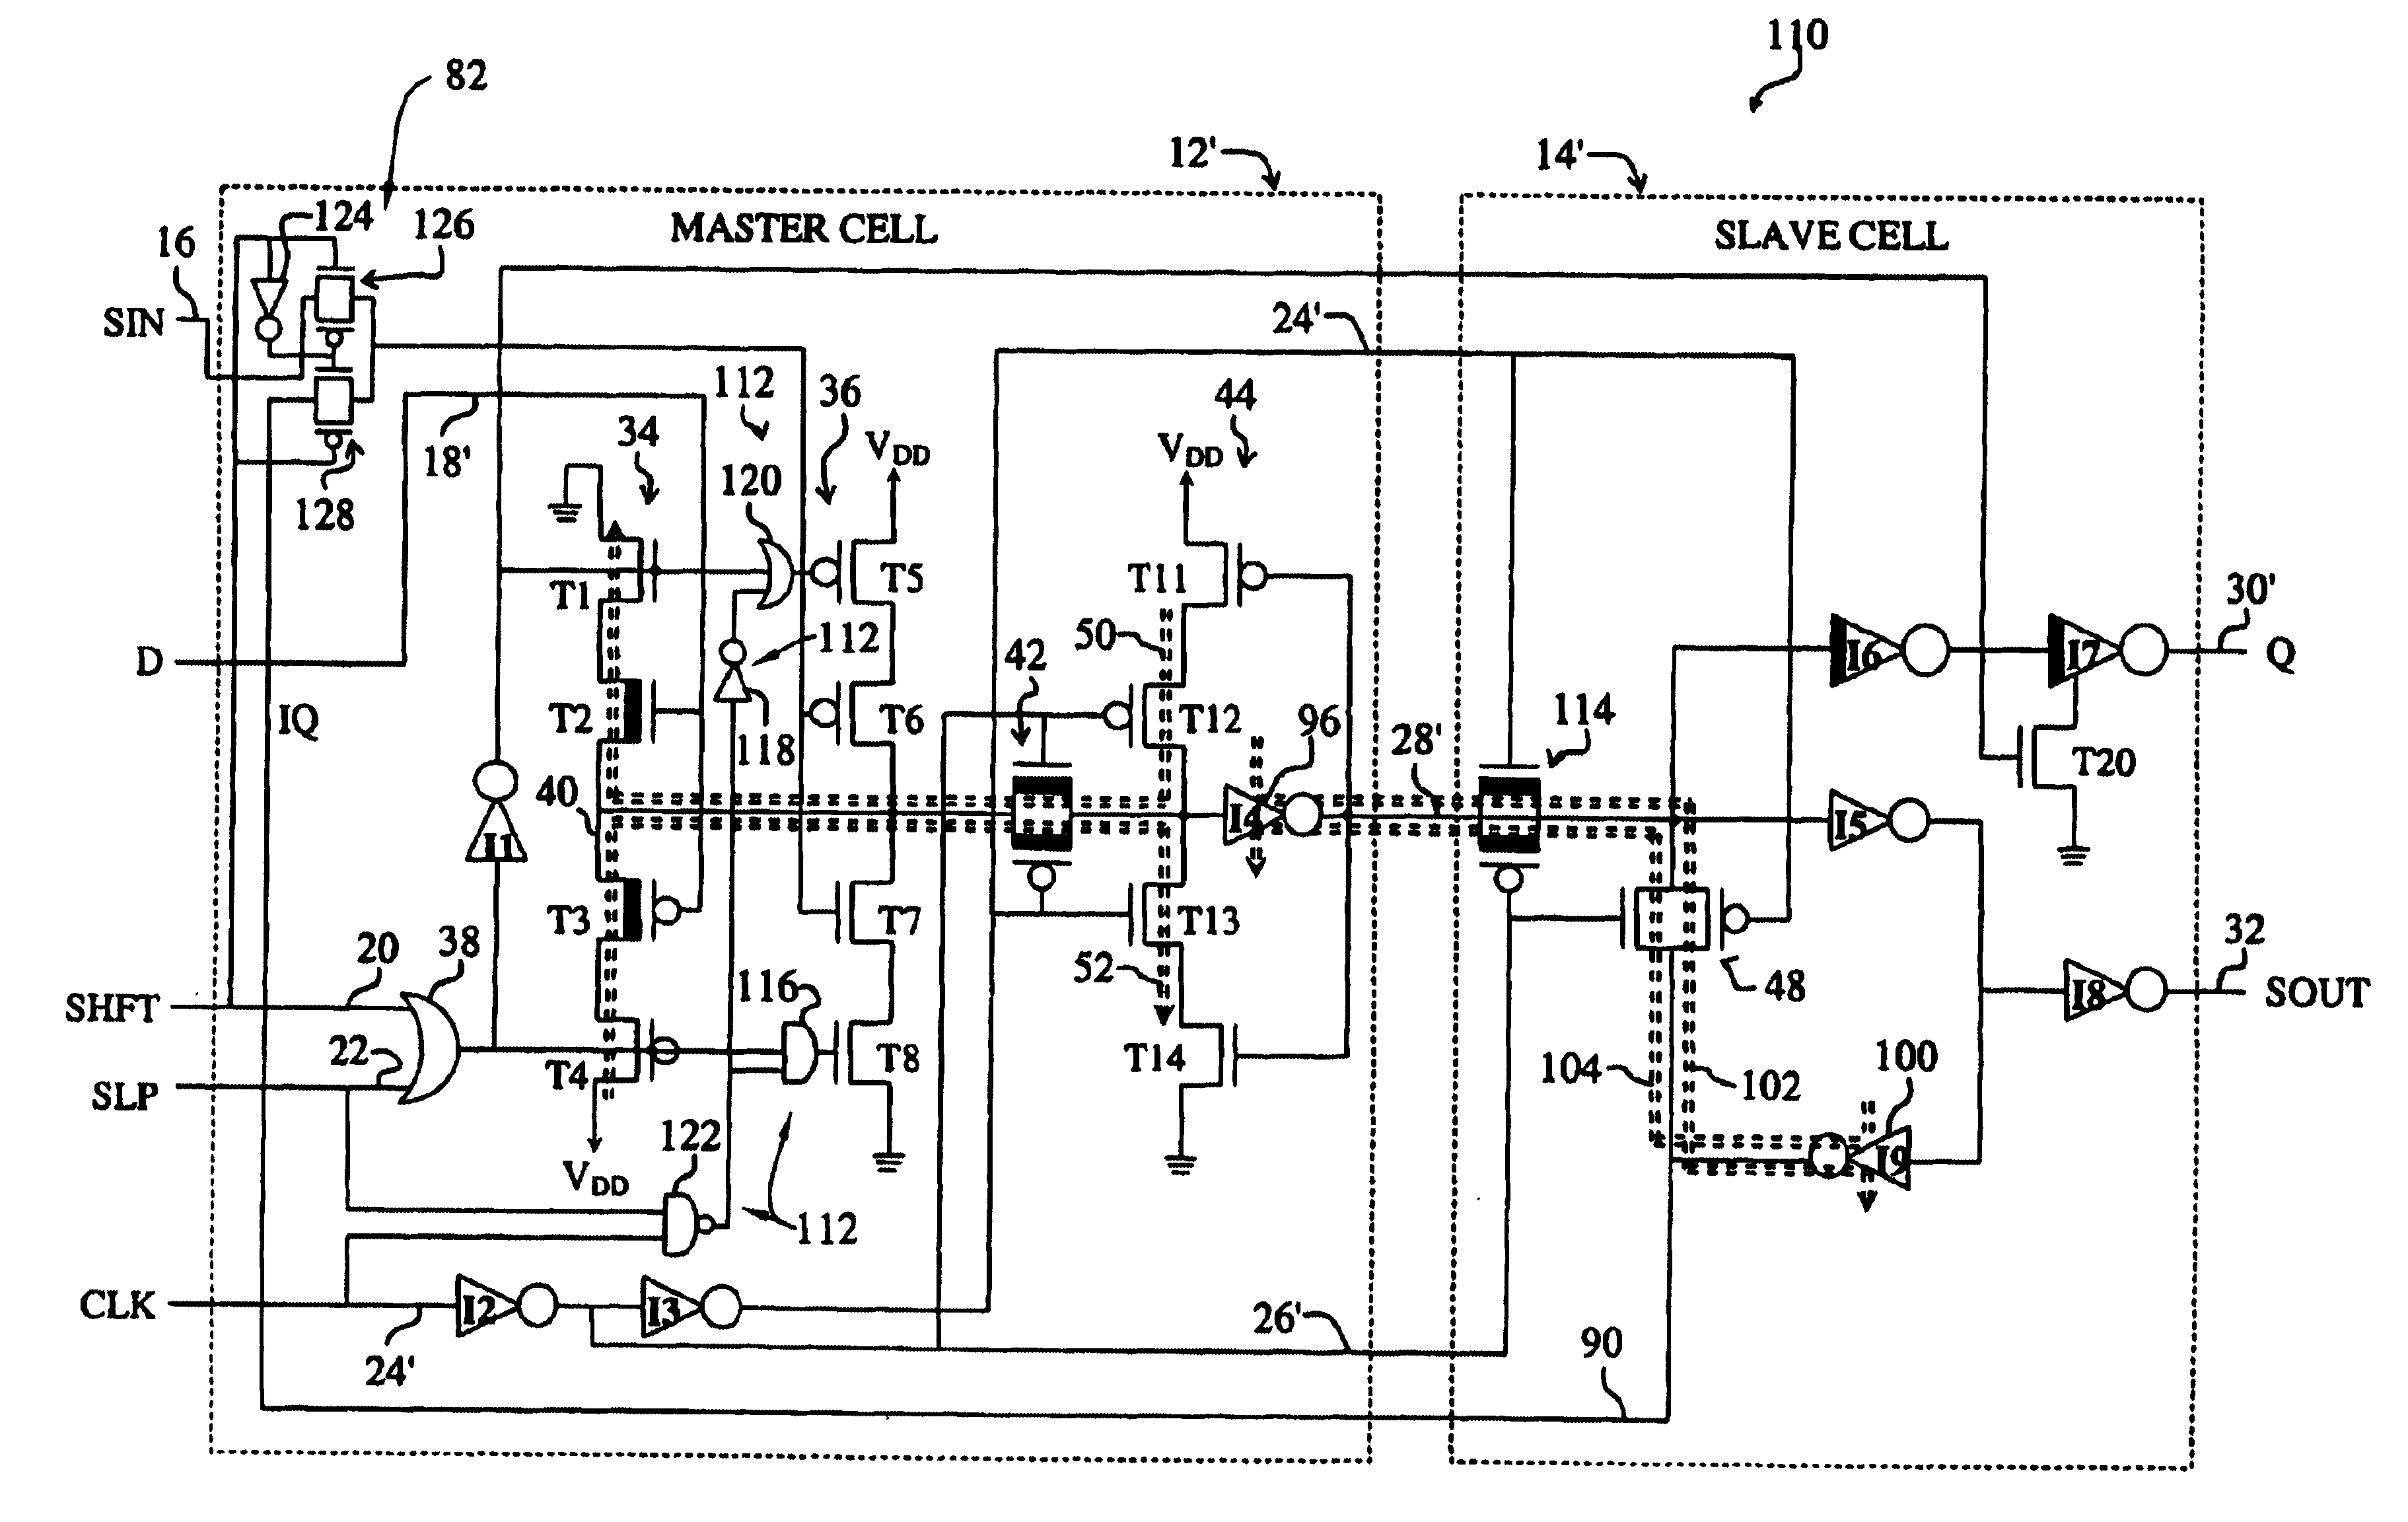 System for reducing leakage in integrated circuits during sleep mode